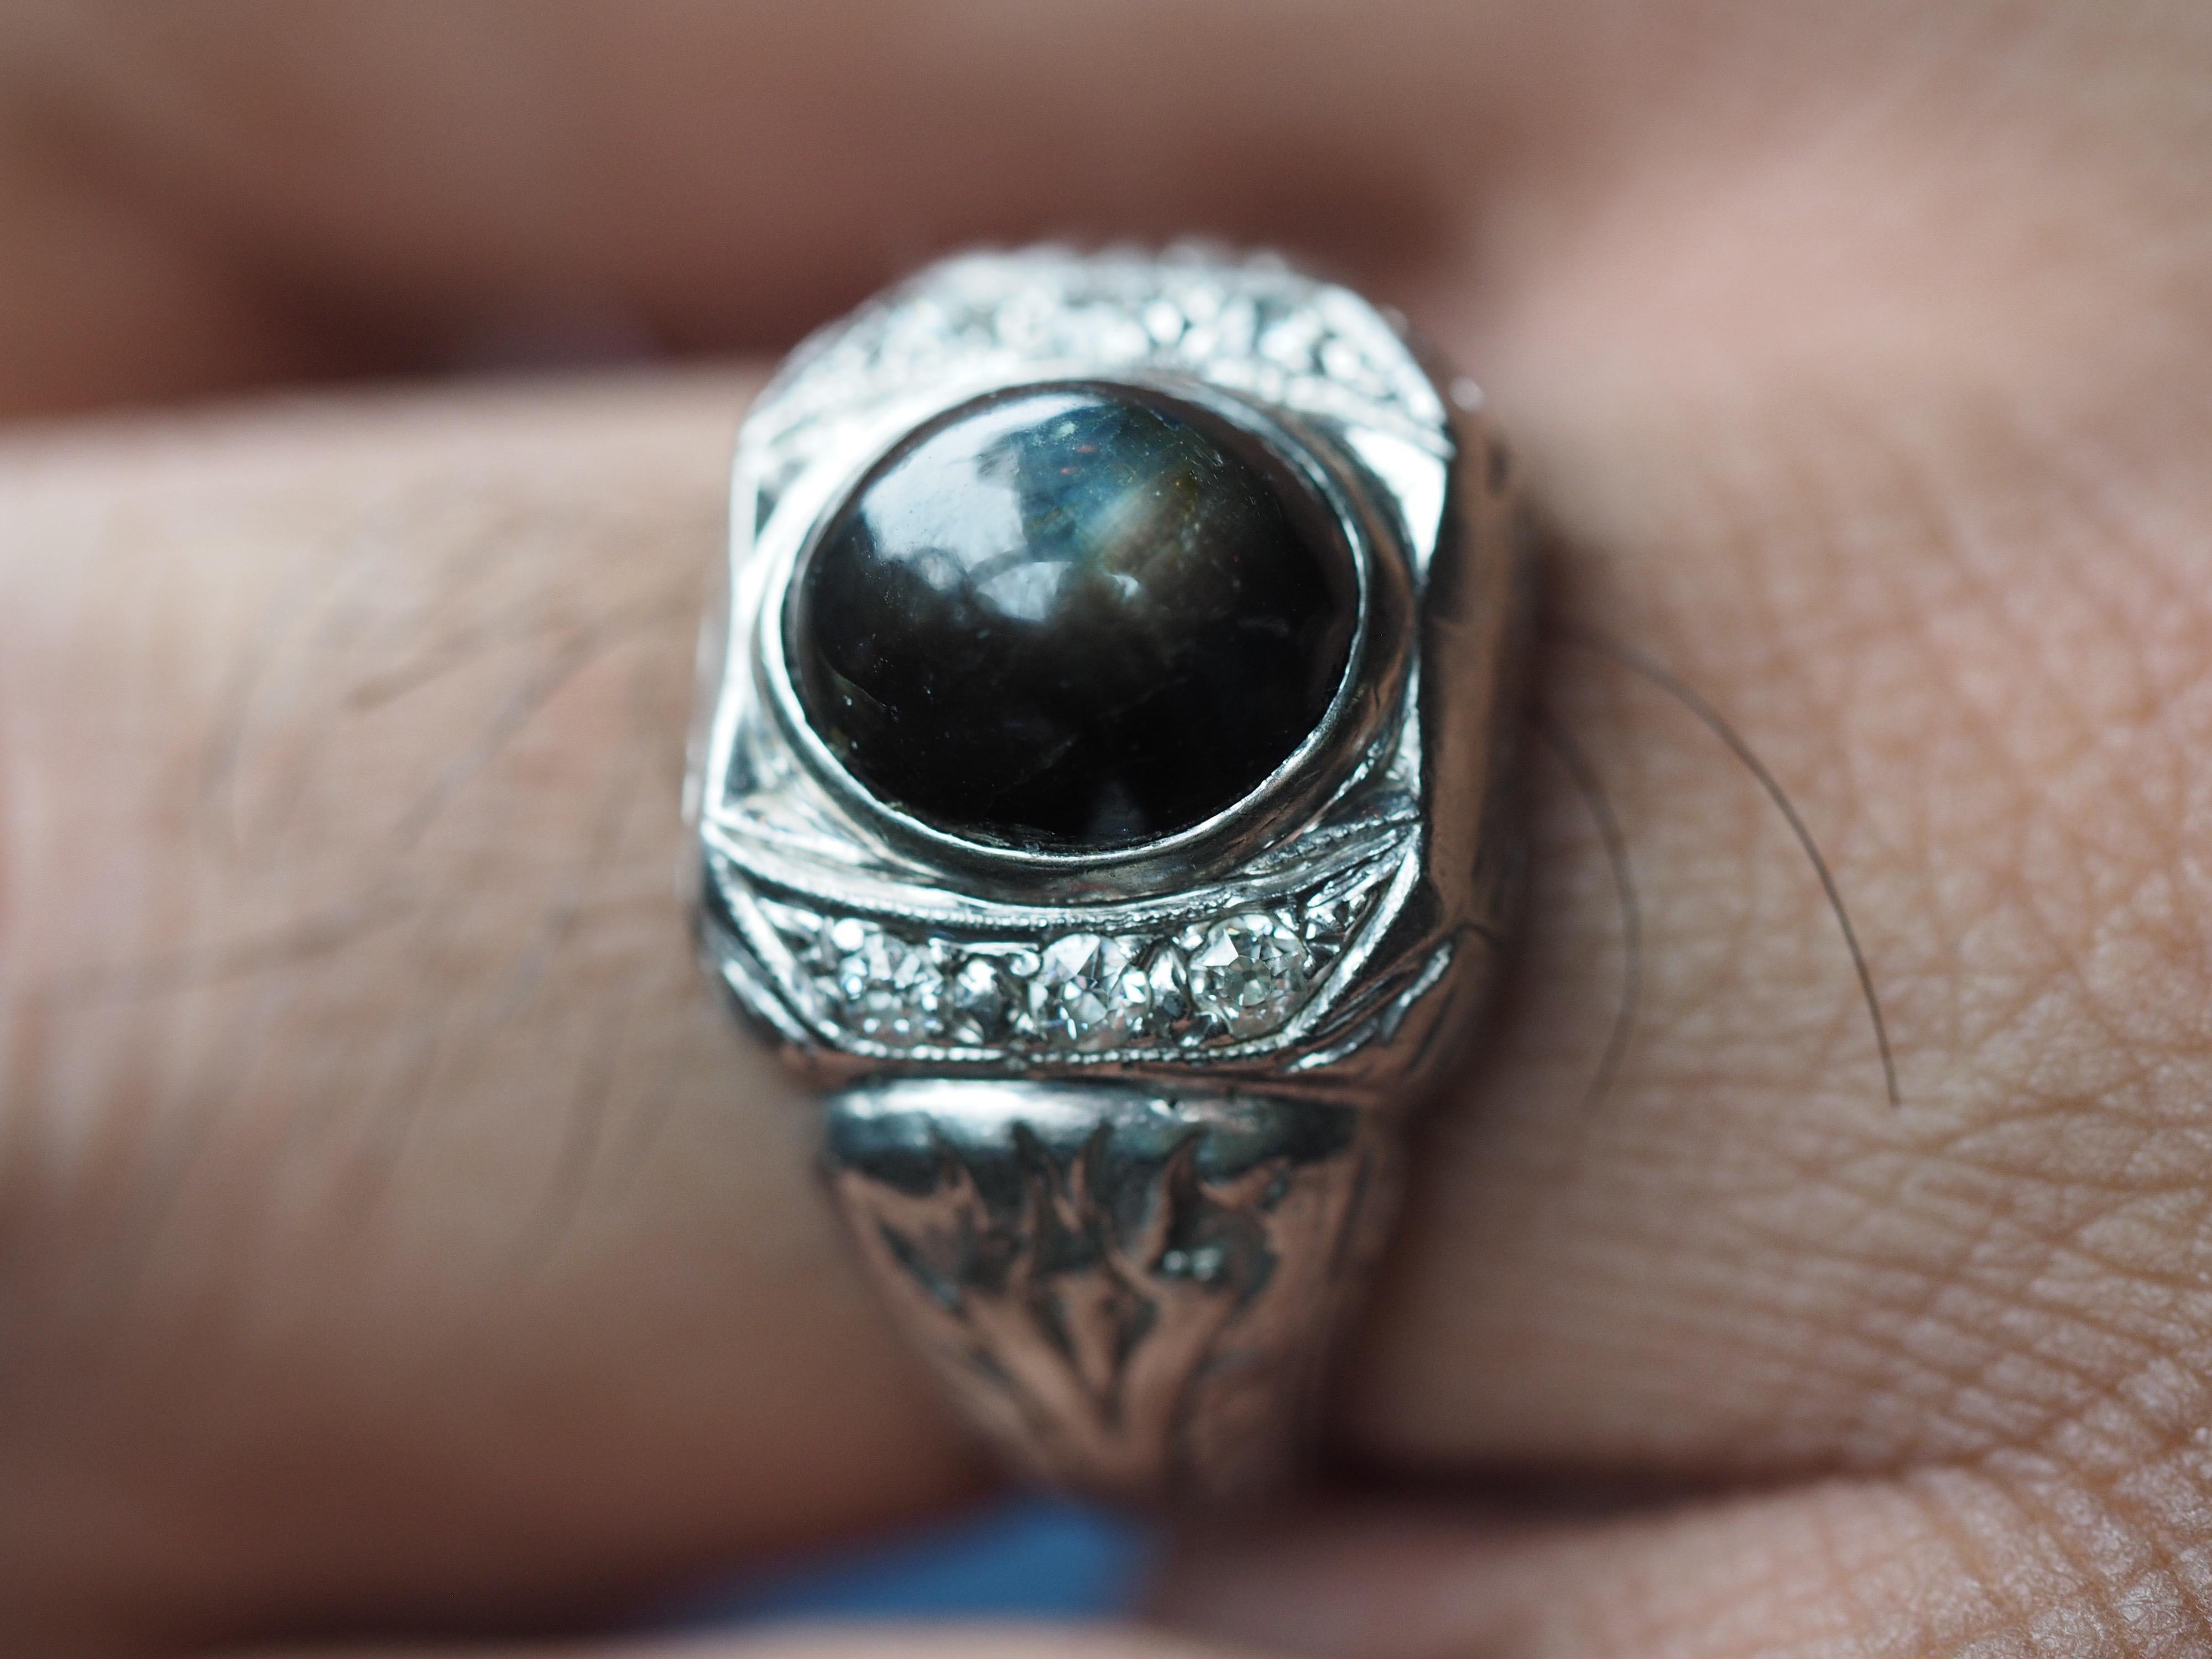 This Vintage men's platinum ring dates back to the 1980's. The heavy platinum ring holds a black chrysoberyl also known as 